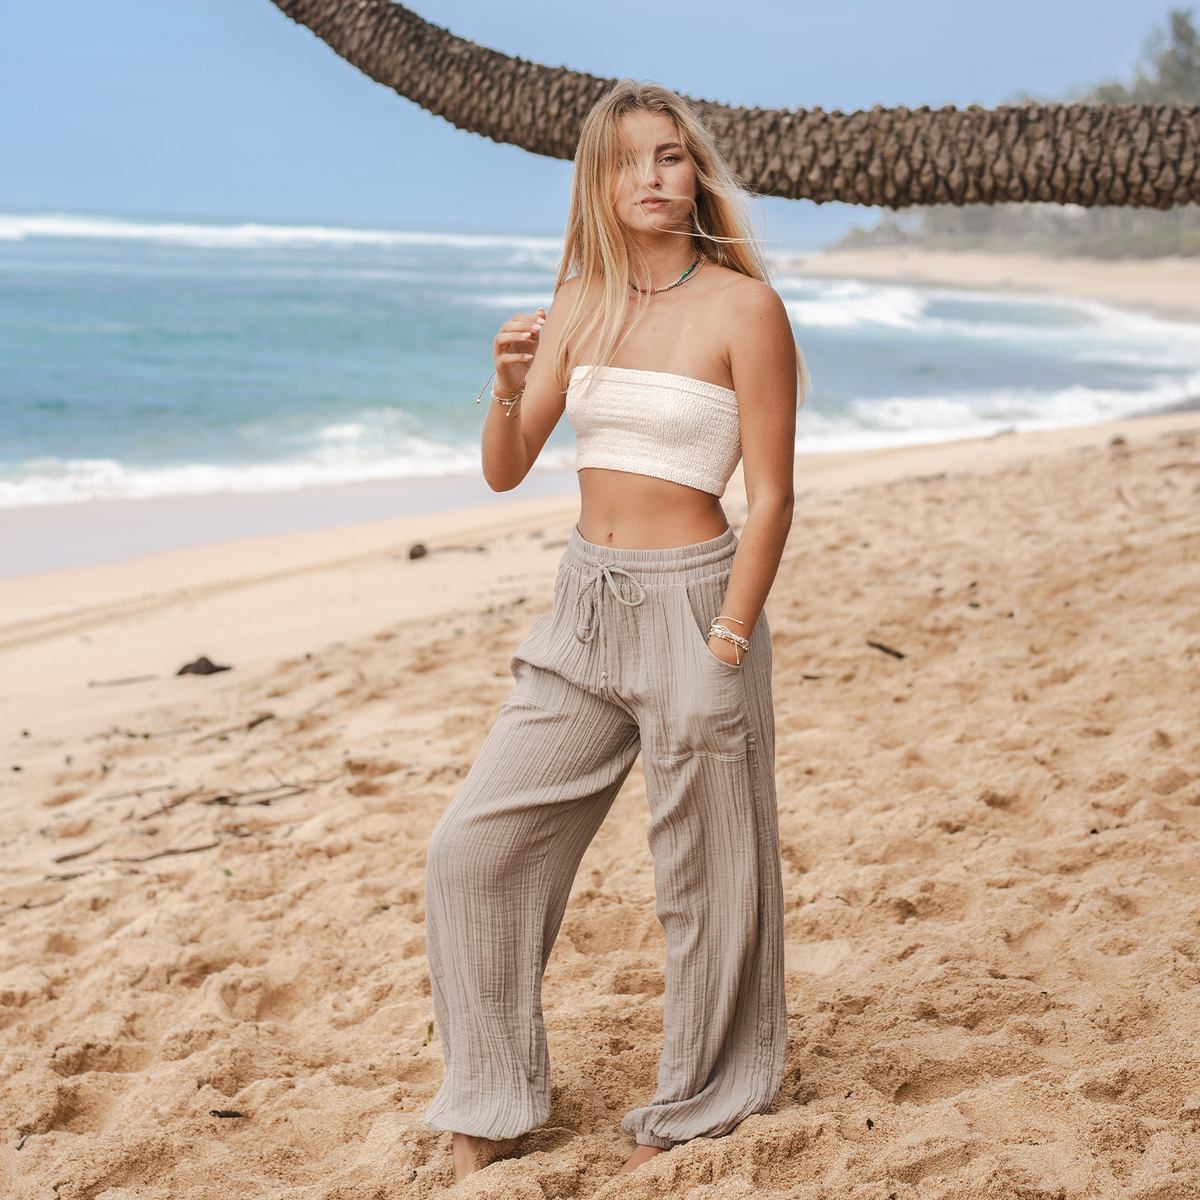 Model standing on the beach wearing stone colored harem pants with a drawstring waistband